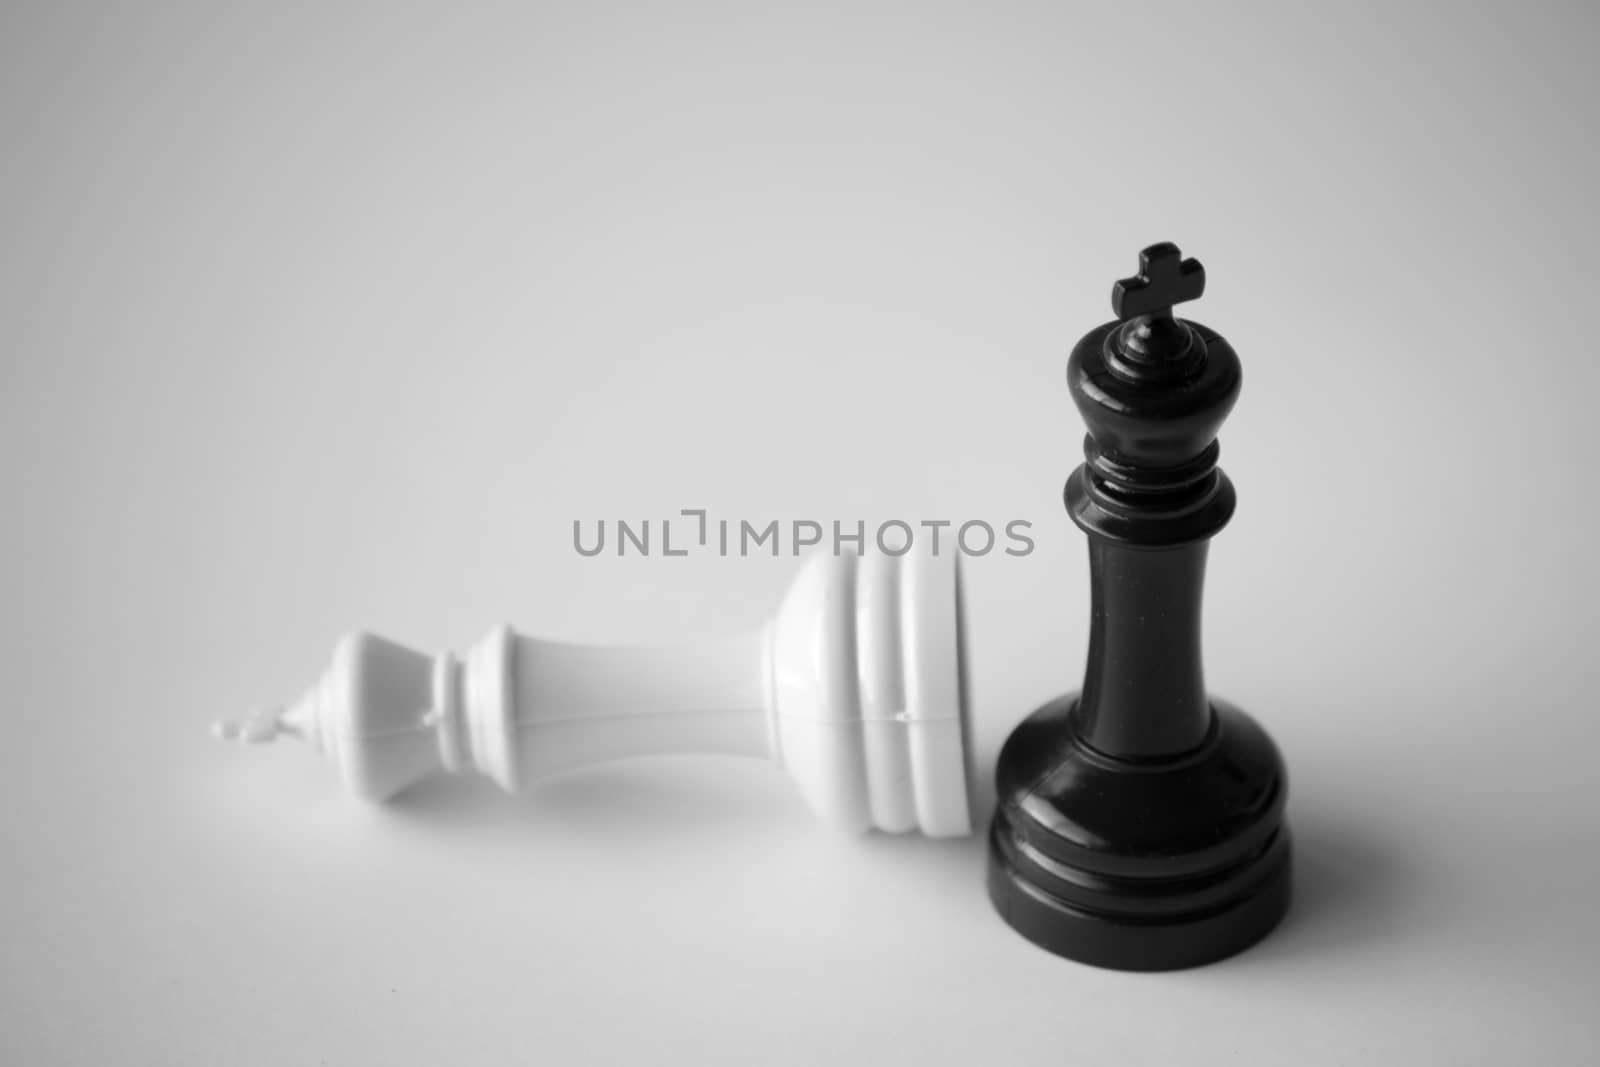 Chess is an strategy and intelligence board game originated in India that is played between two people on a chessboard